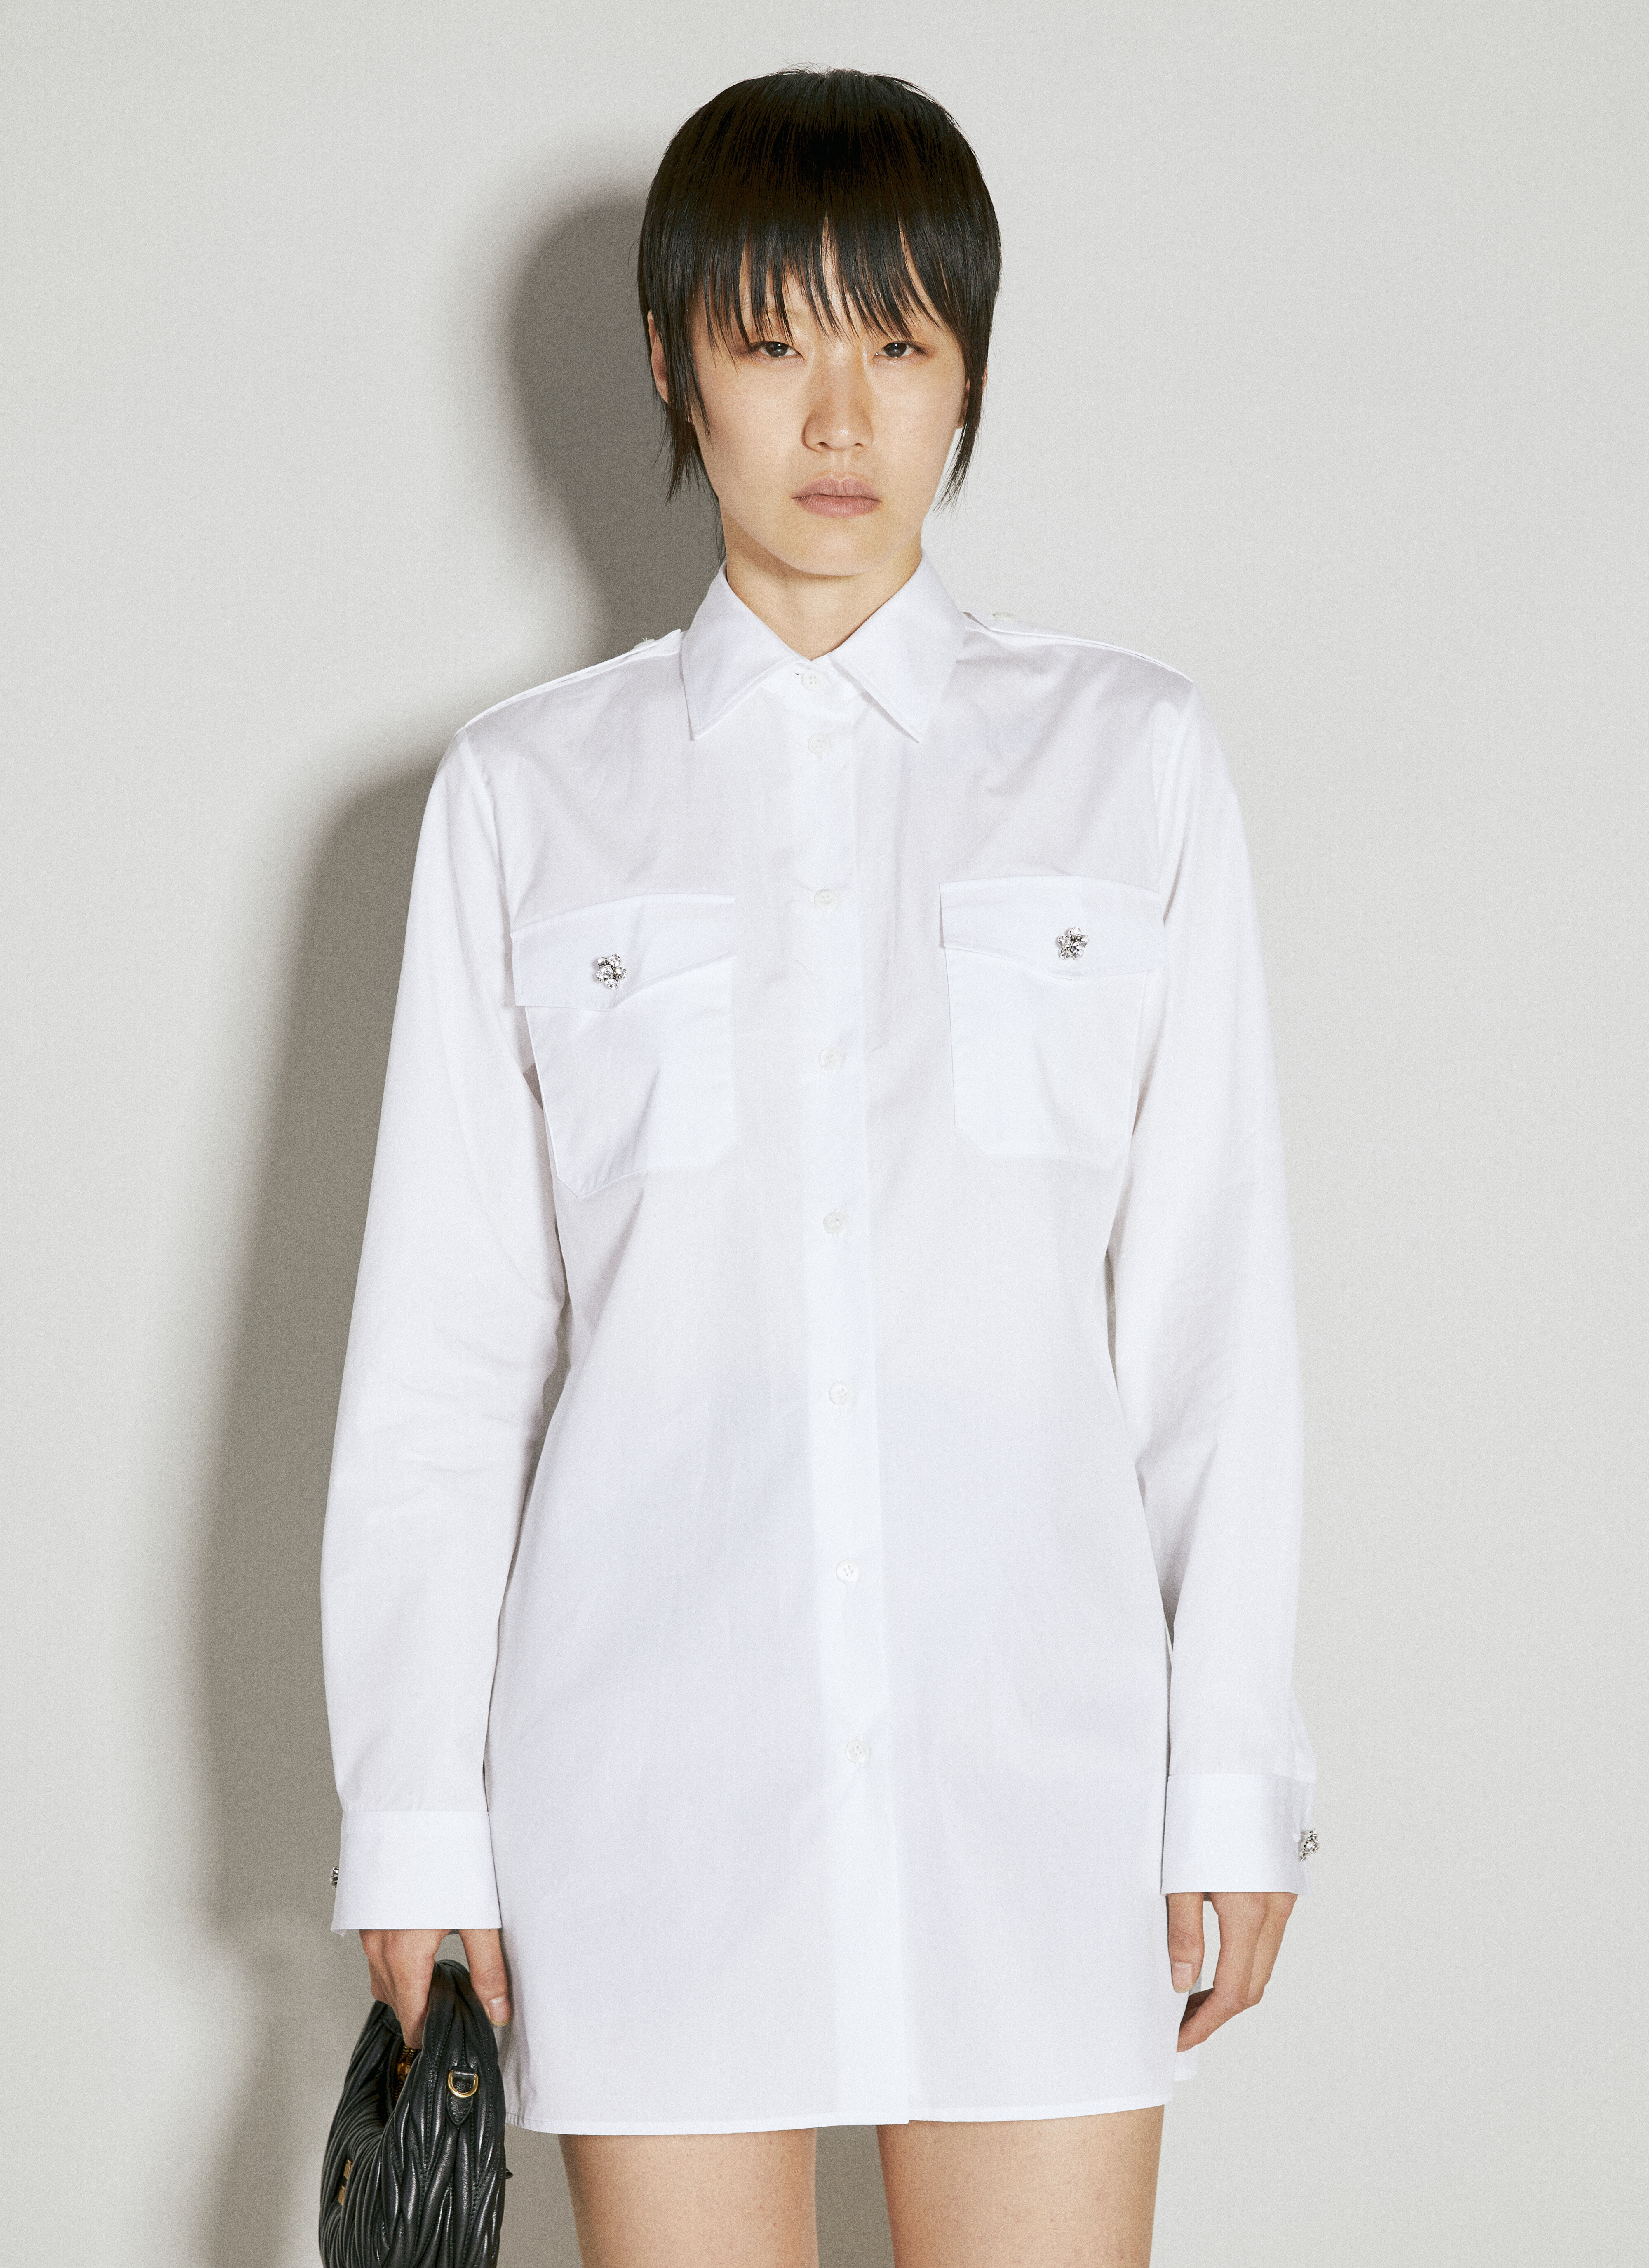 Prada Classic Shirt With Embellished Buttons Beige pra0256027